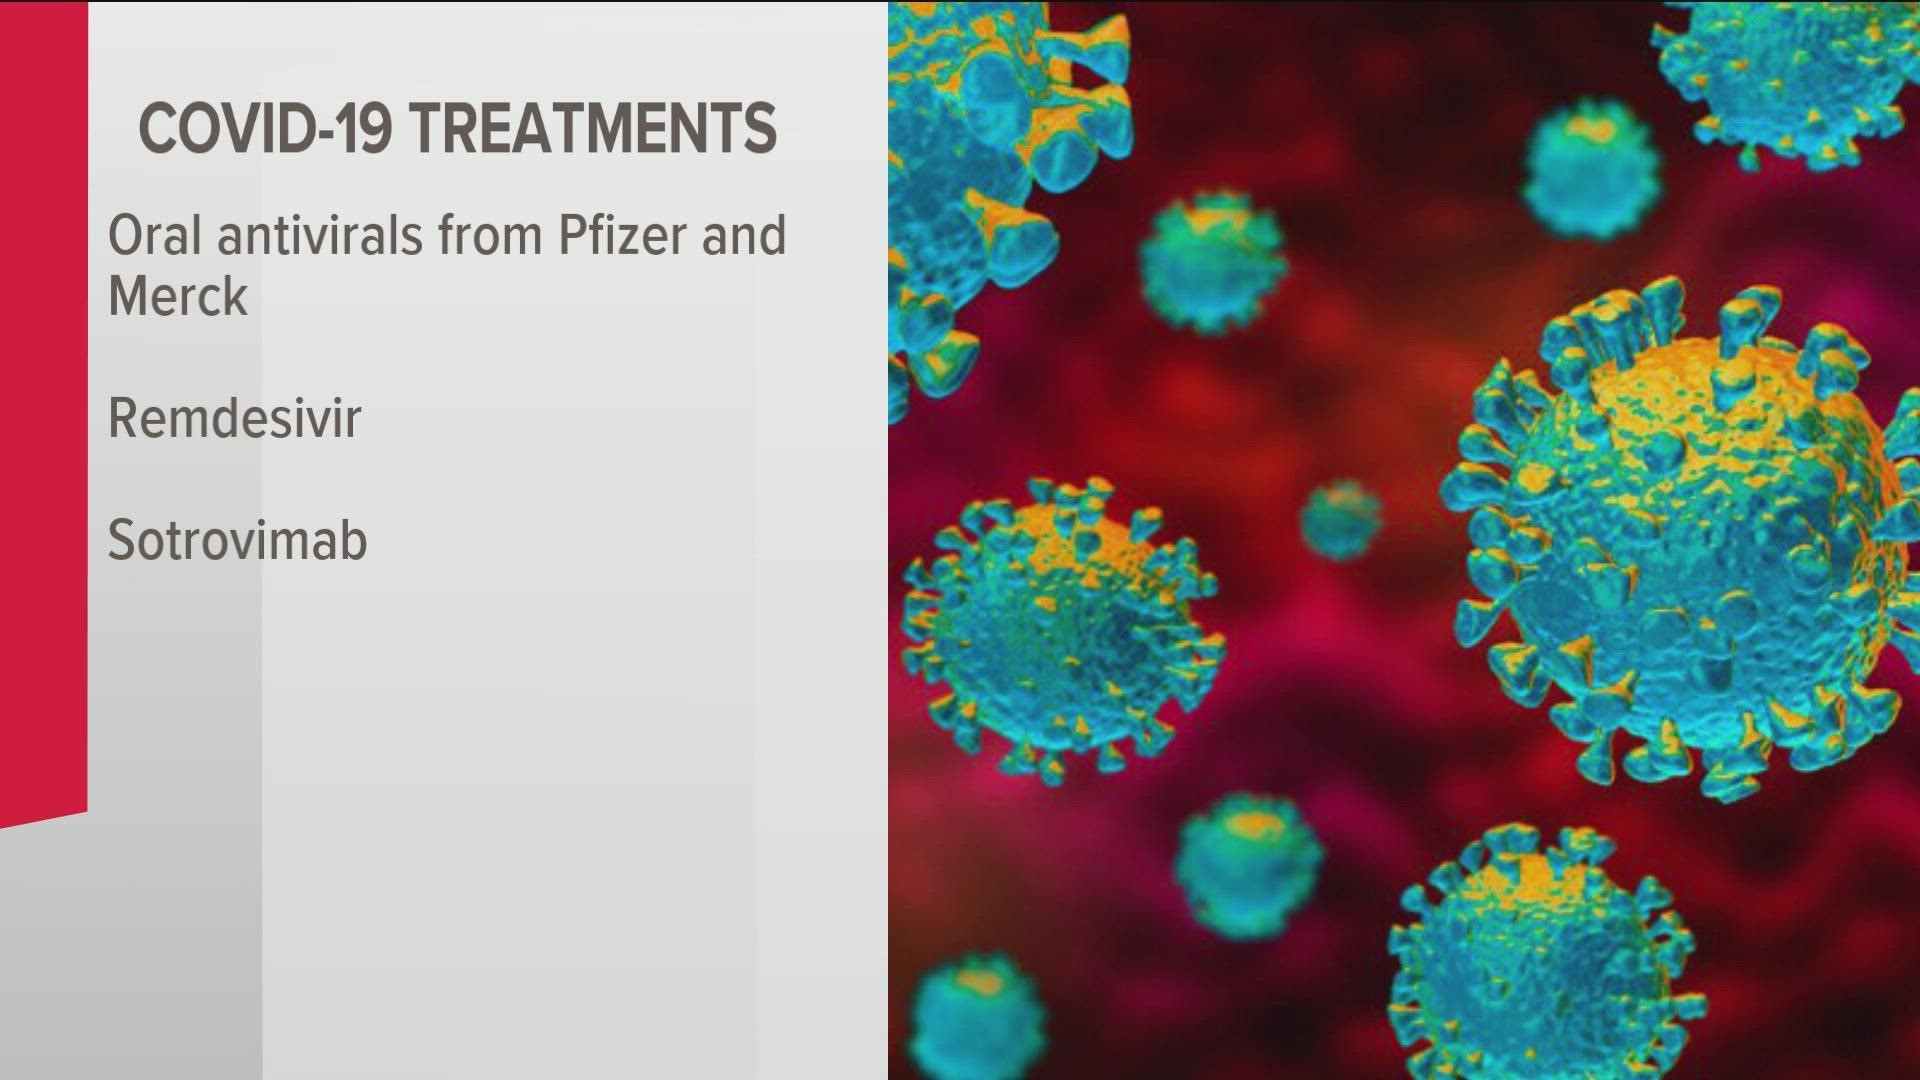 These two monoclonal antibody treatments are no longer authorized for use.